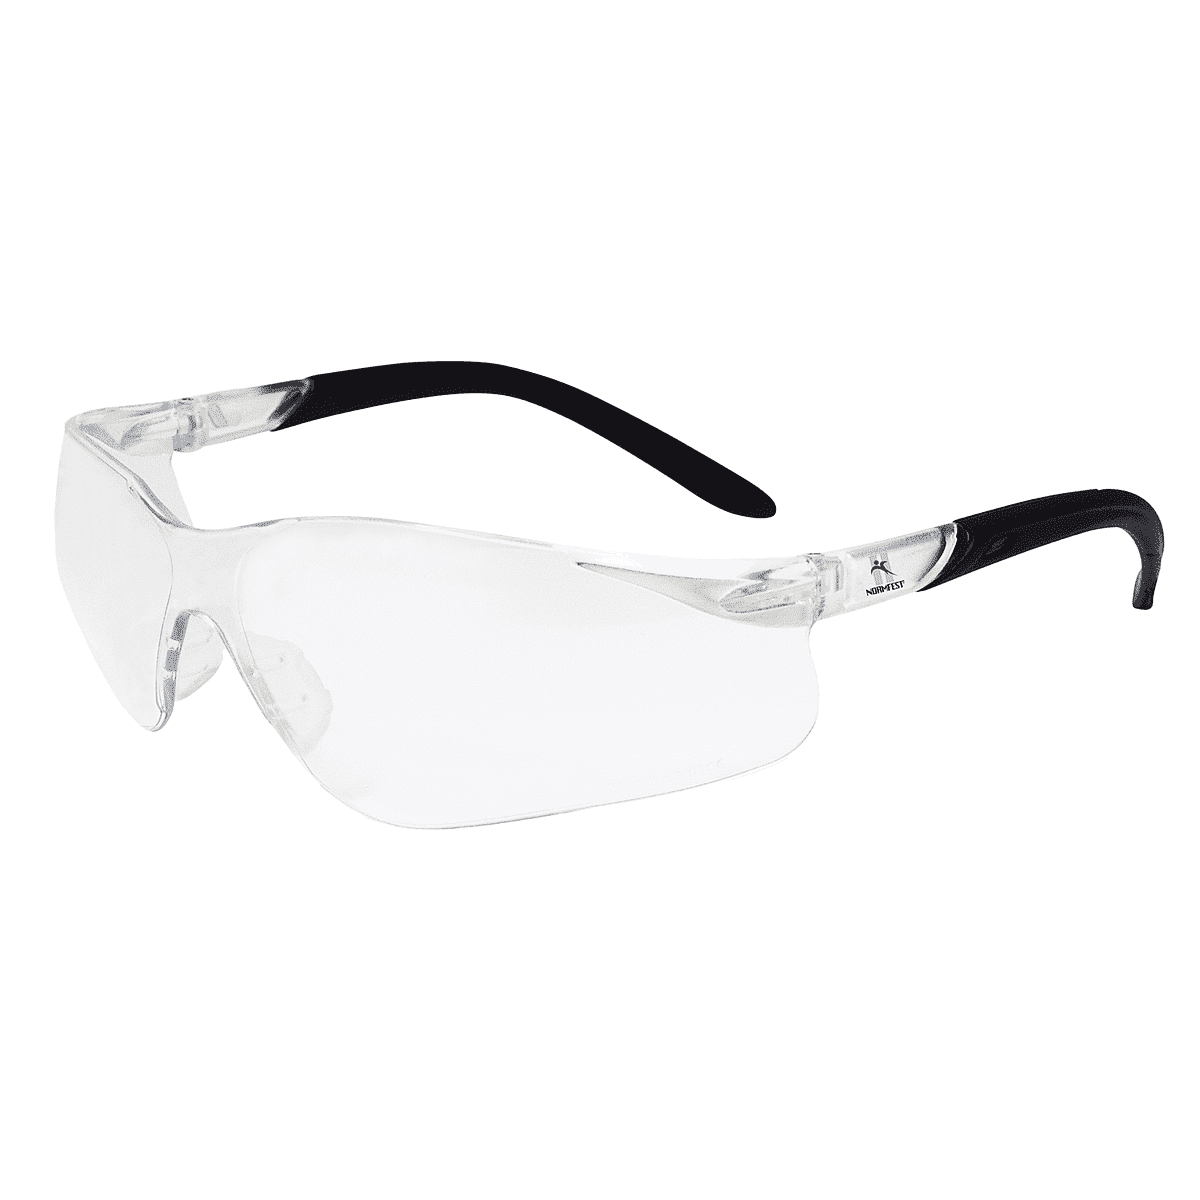 Schutzbrille VISION Protect 